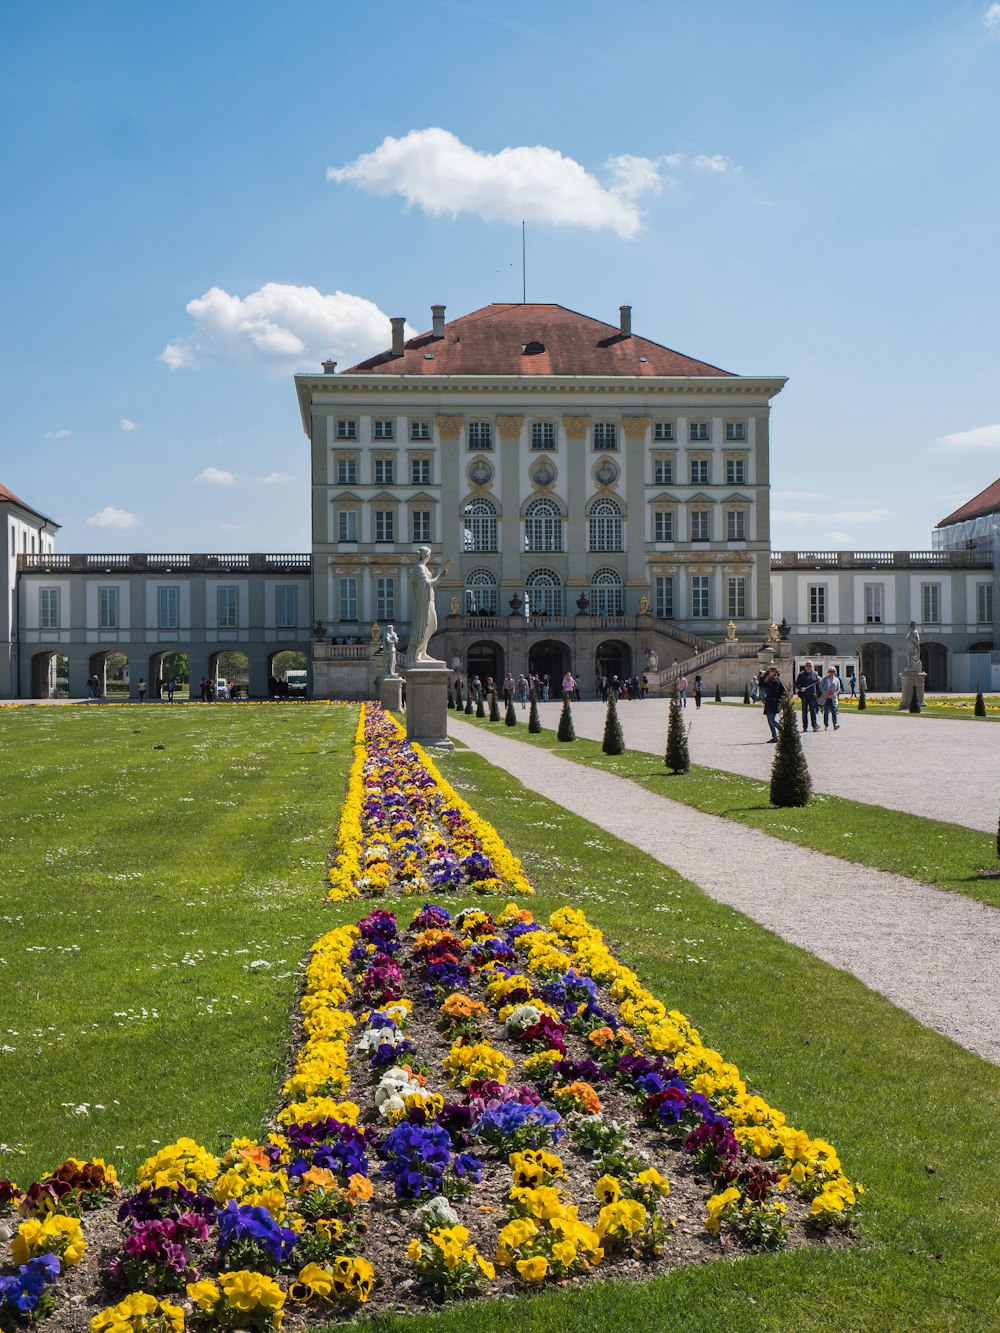 people walking near Nymphenburg Palace in Munich, Germany under blue and white sky